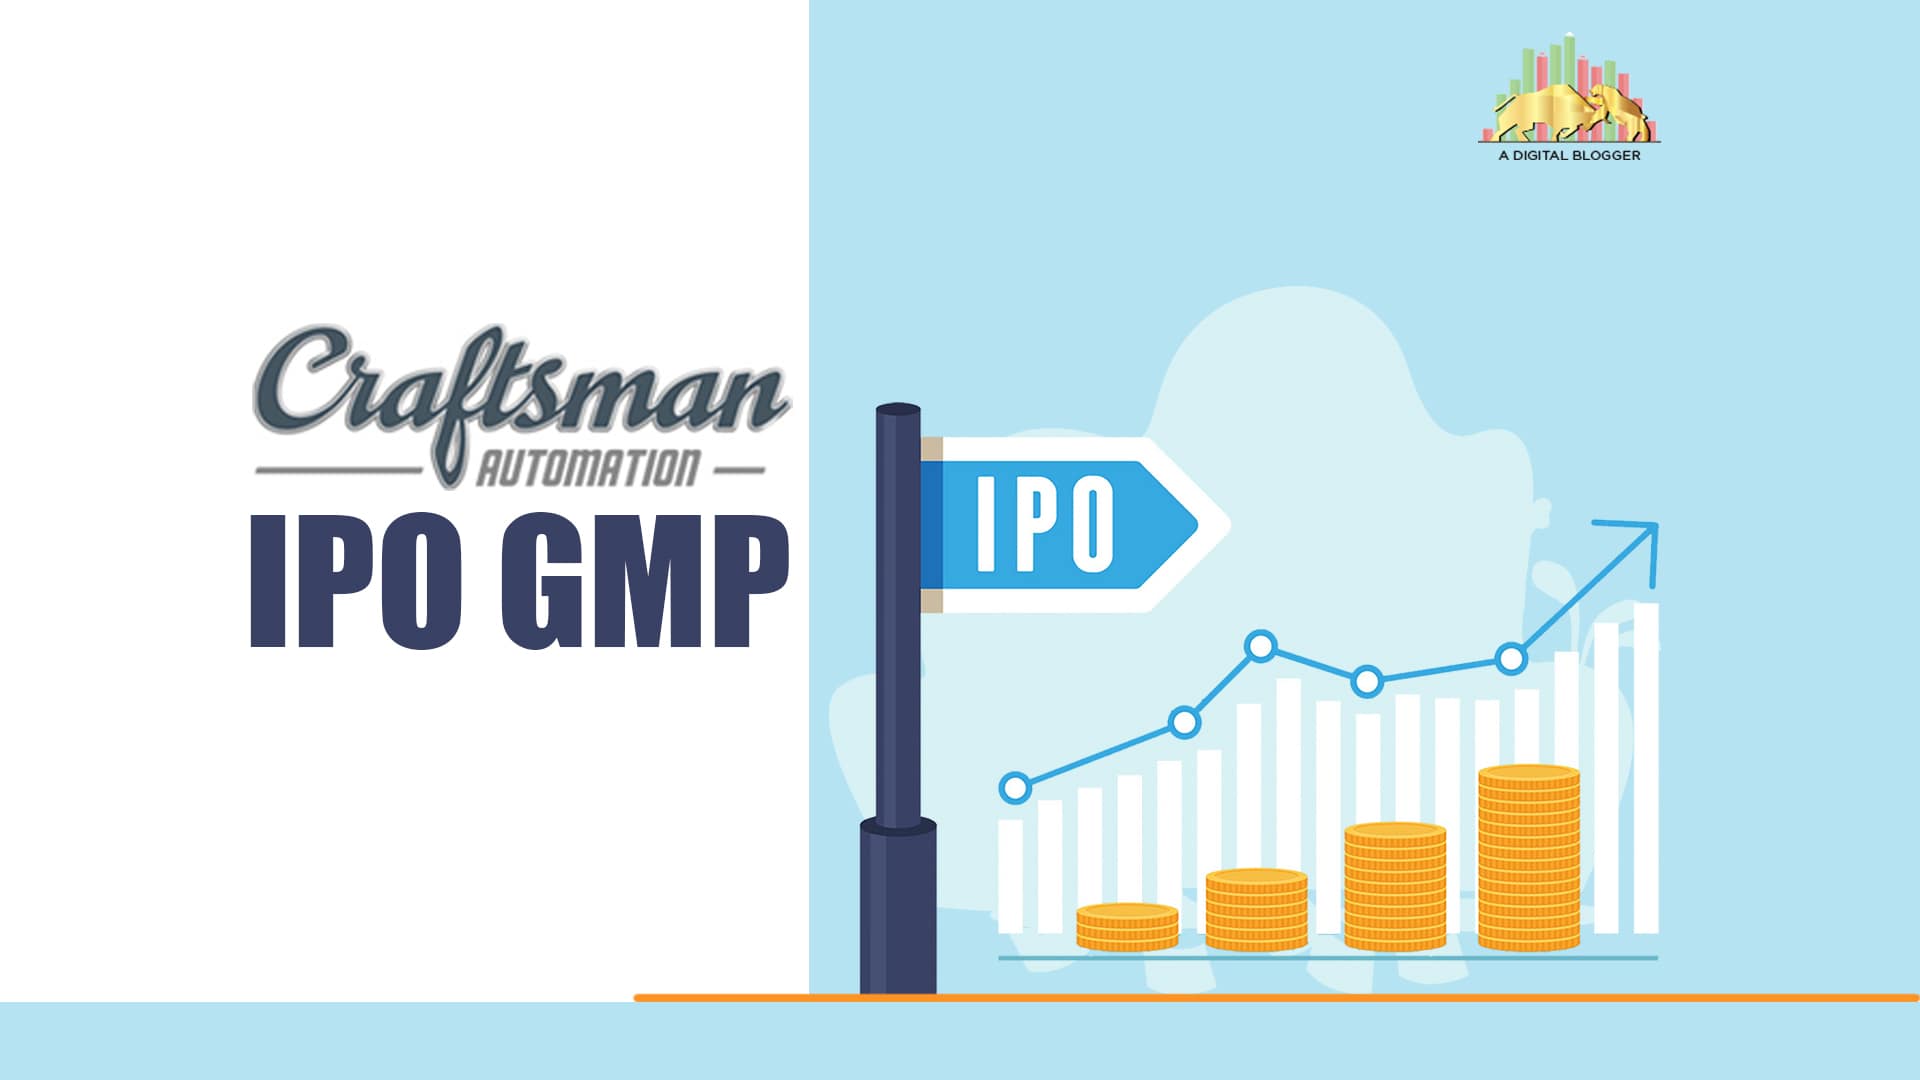 Craftsman Automation IPO GMP | Status, Today, Live Update